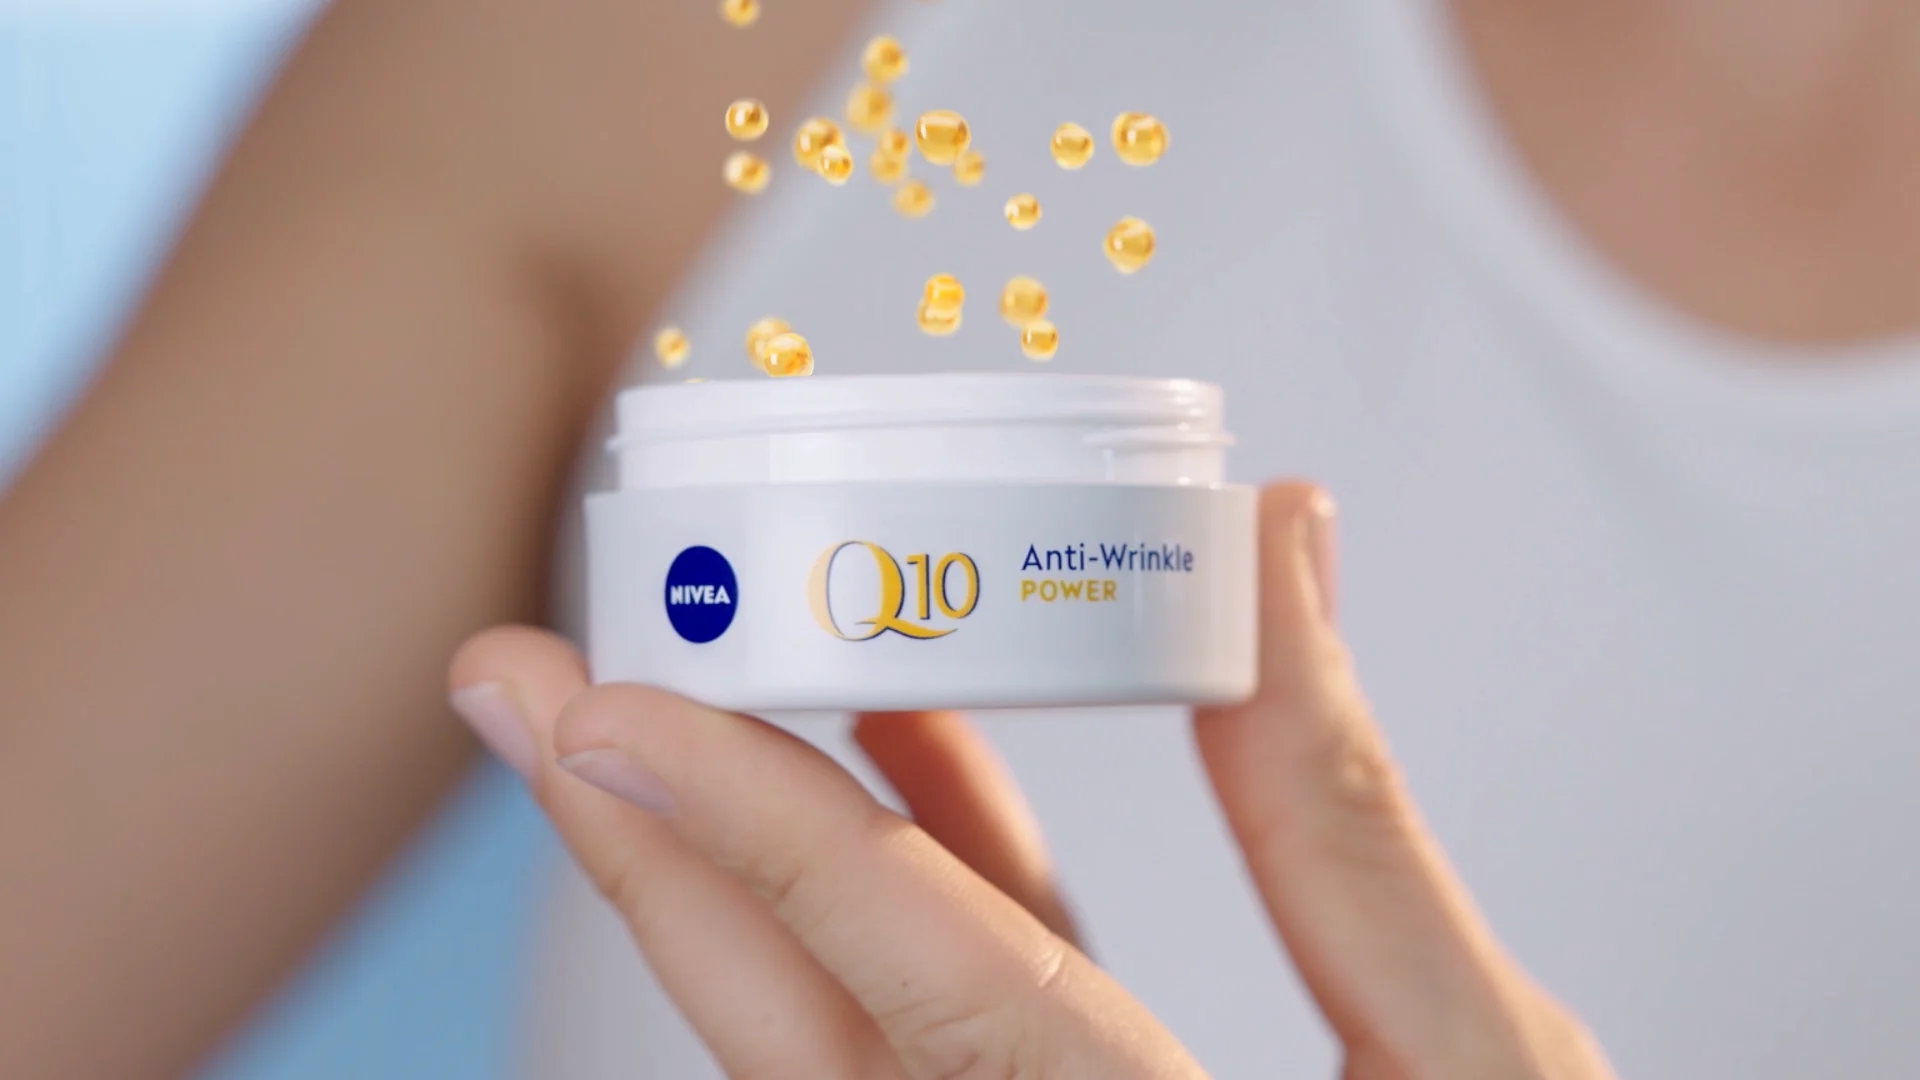 yellow bubbles falling into a white Nivea Q10 anti wrinkle packshot which is been hold in a hand. woman blurred in the background